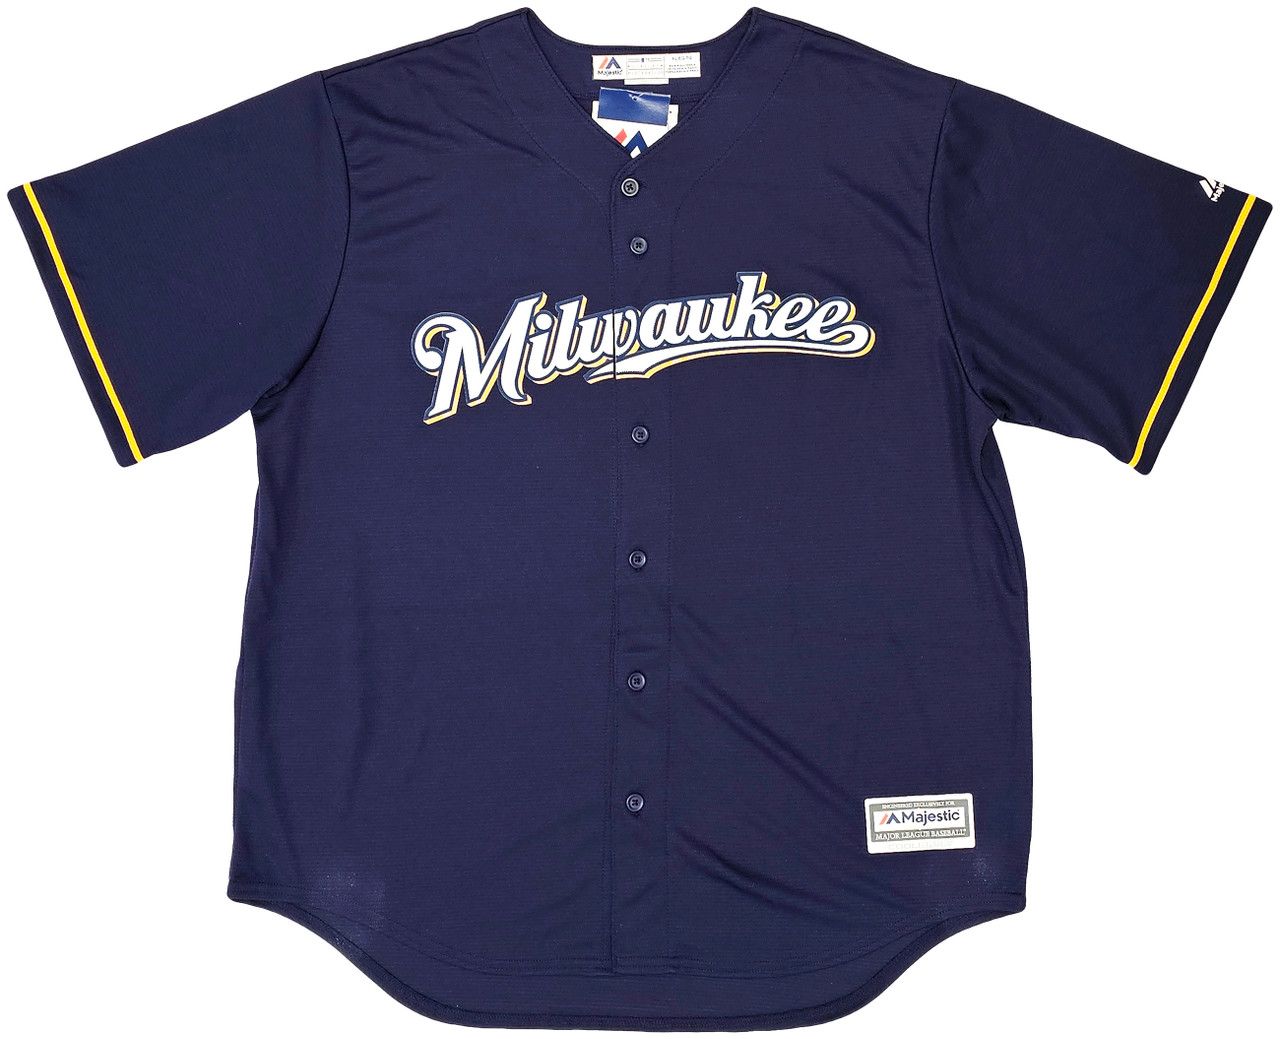 Christian Yelich Cream Milwaukee Brewers Autographed Nike Authentic Jersey